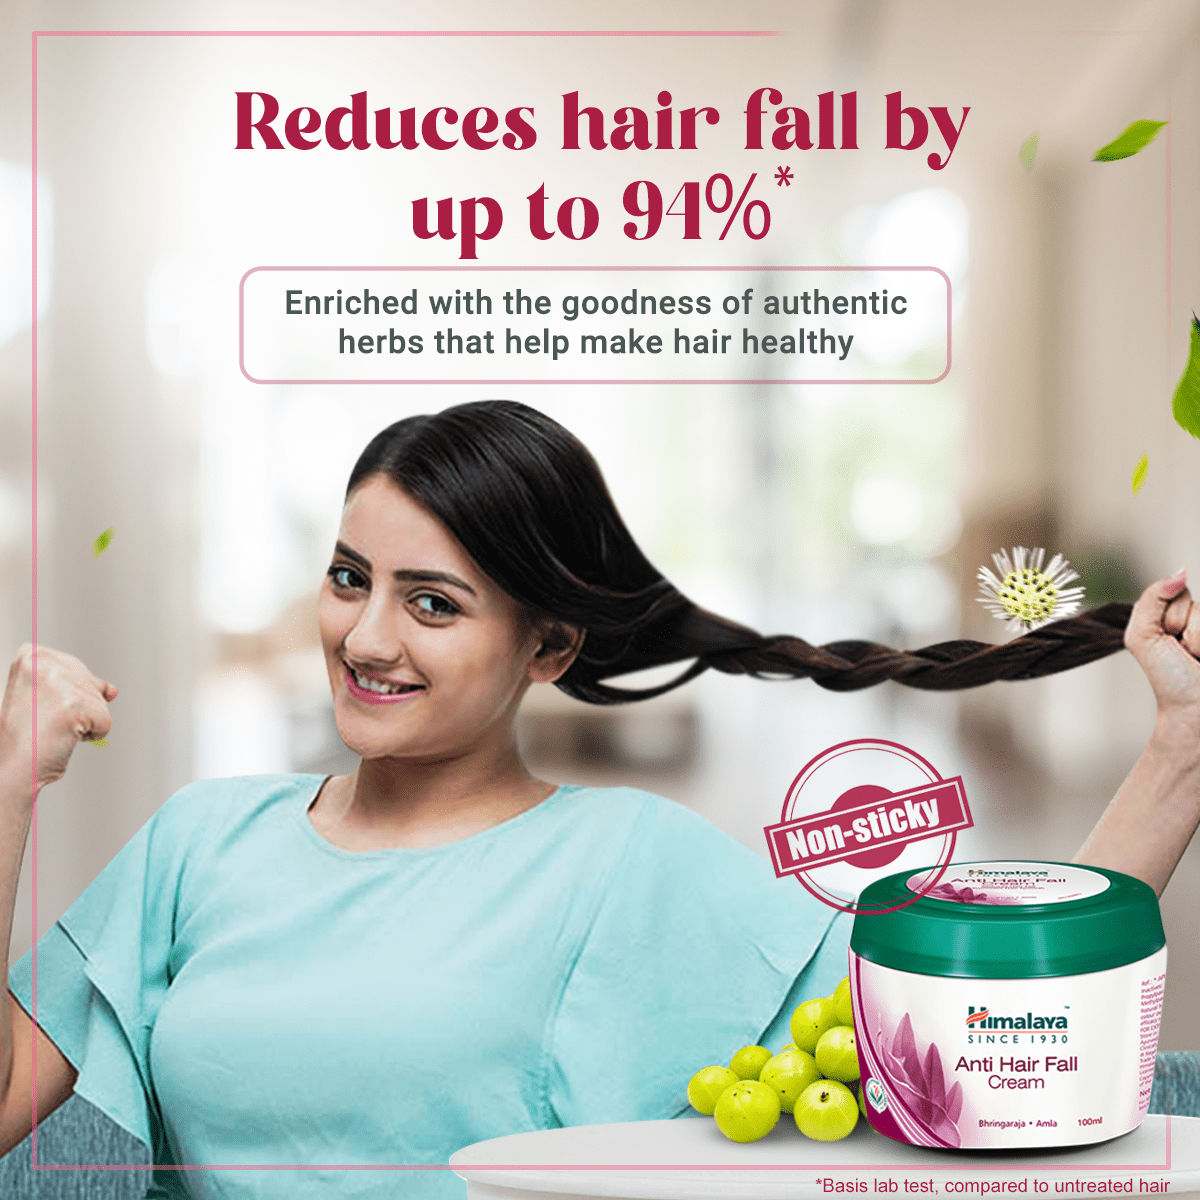 Himalaya Set of Anti-Hair Fall Shampoo & Gentle Daily Care Protein  Conditioner Price in India, Full Specifications & Offers | DTashion.com